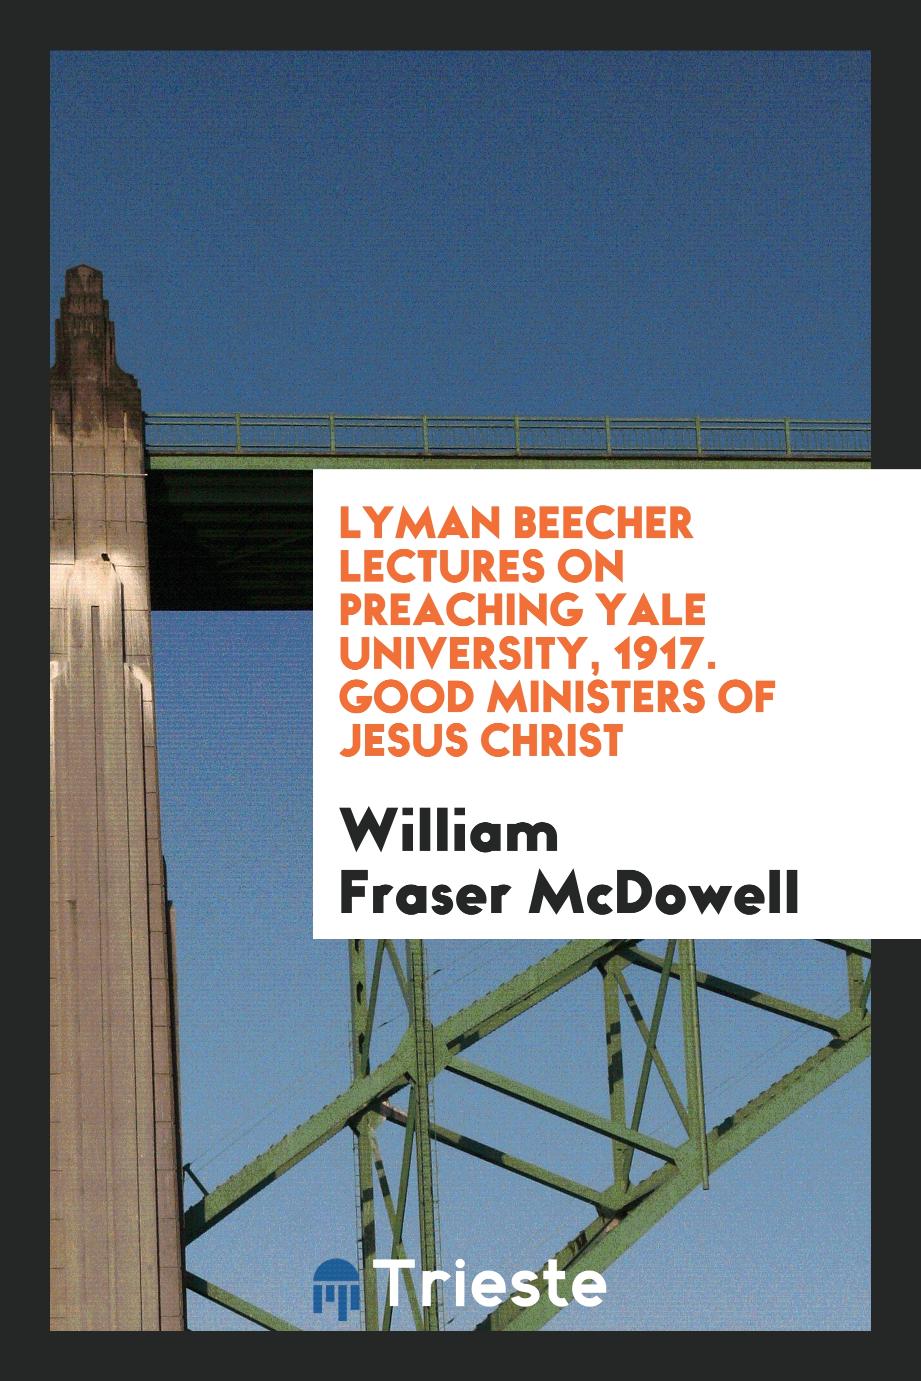 Lyman Beecher Lectures on Preaching Yale University, 1917. Good Ministers of Jesus Christ